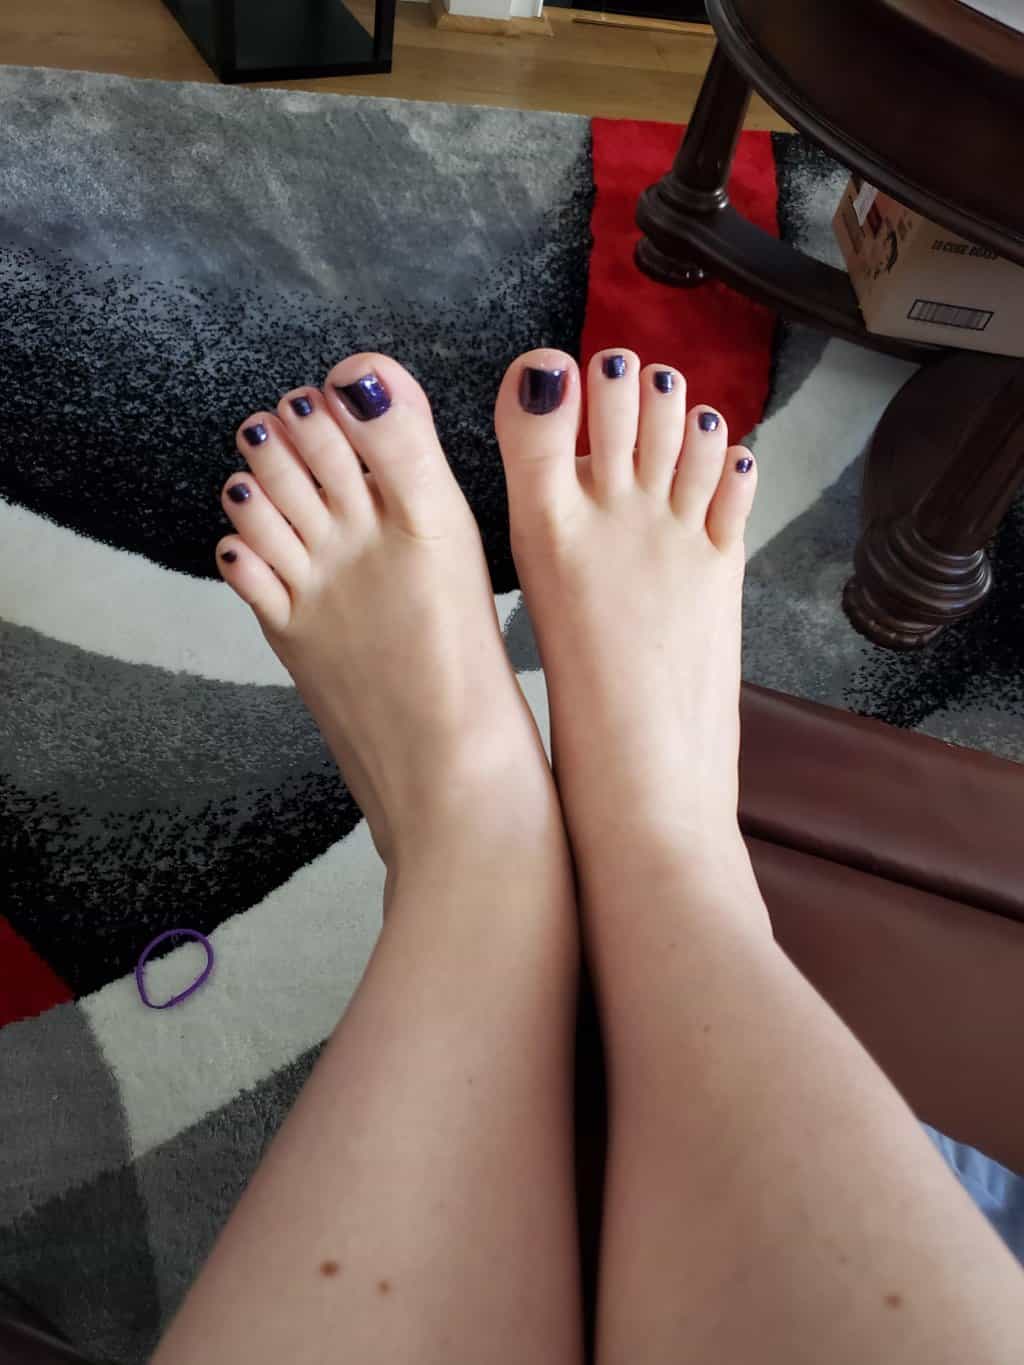 For any foot fans I have, I treated myself to a pedicure today!! Do you like it?